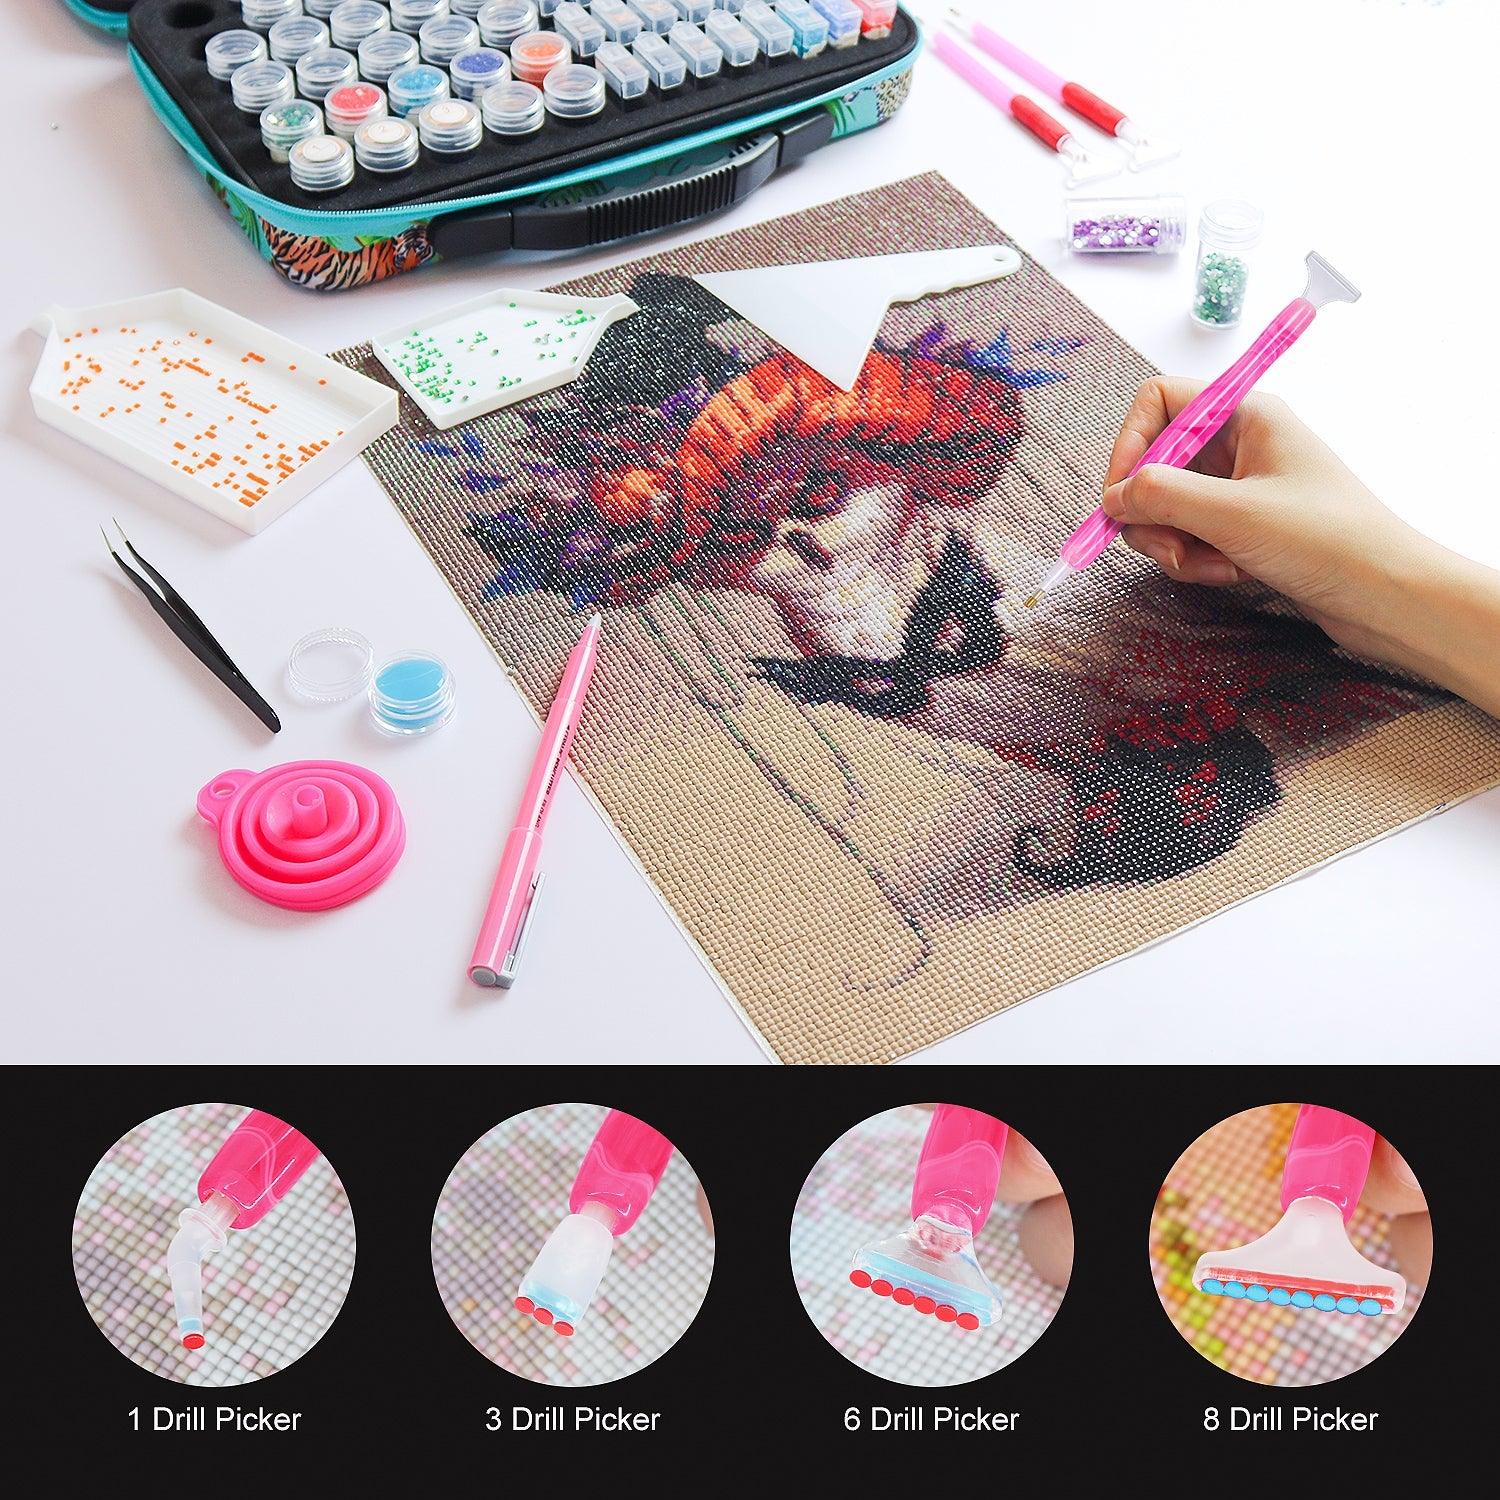 Tiger Leopard 87 in 1 Diamond Painting Tool Kits Storage Container Diamond Painting